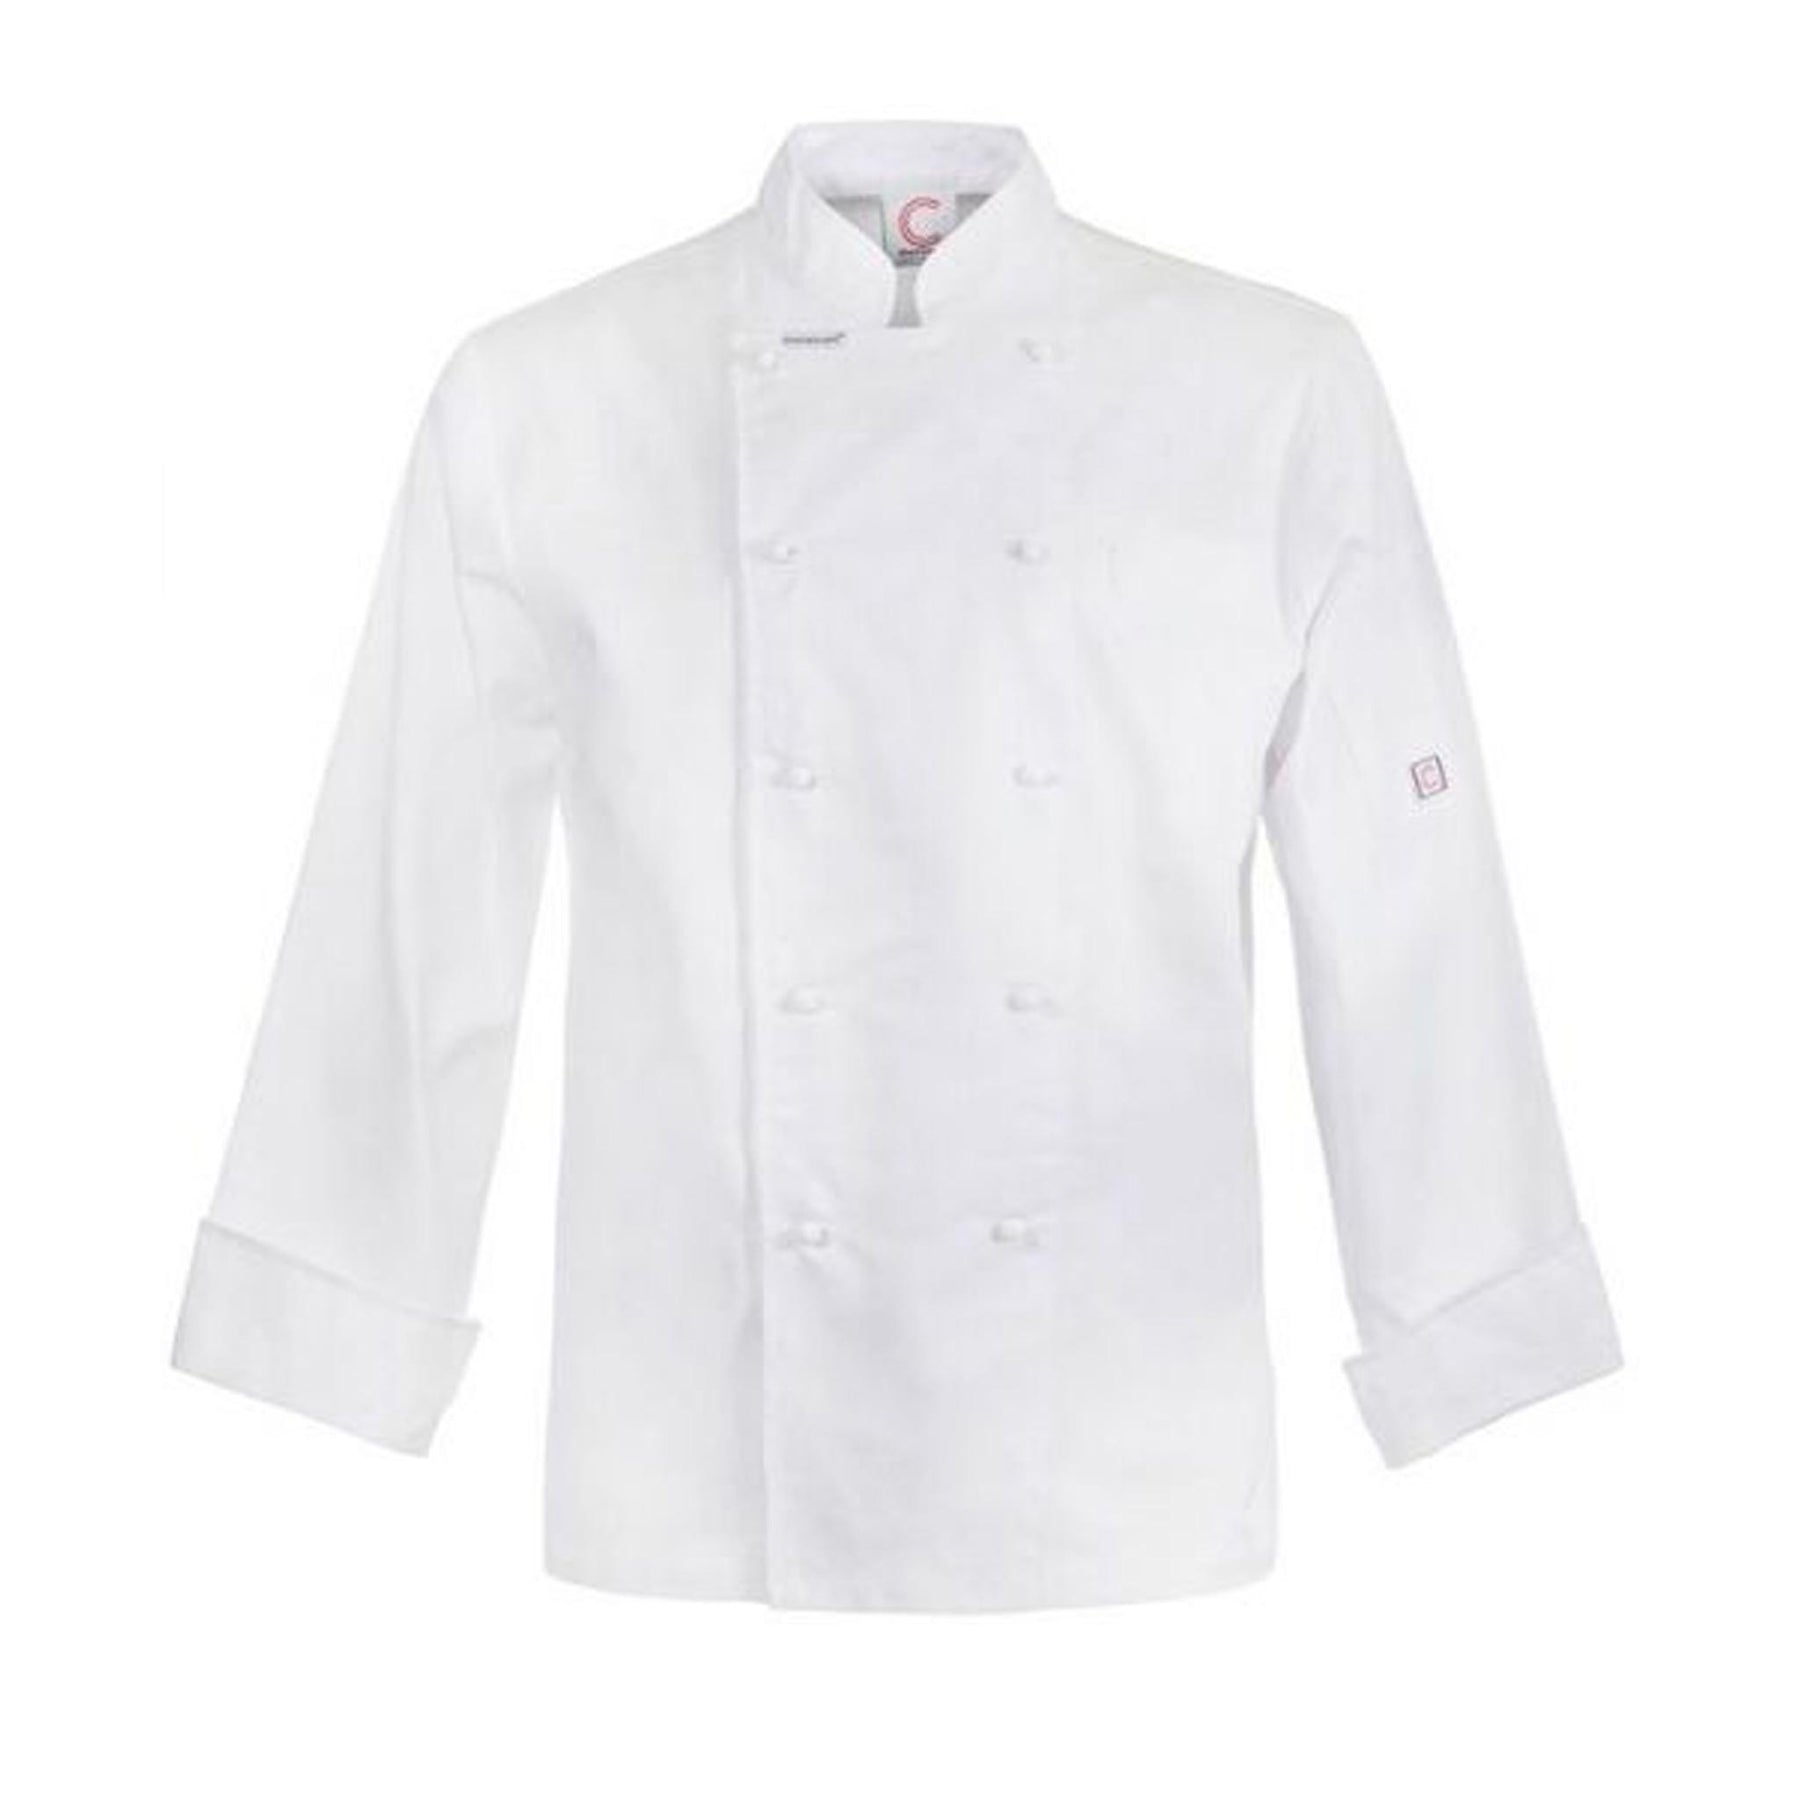 executive long sleeve chefs jacket in white